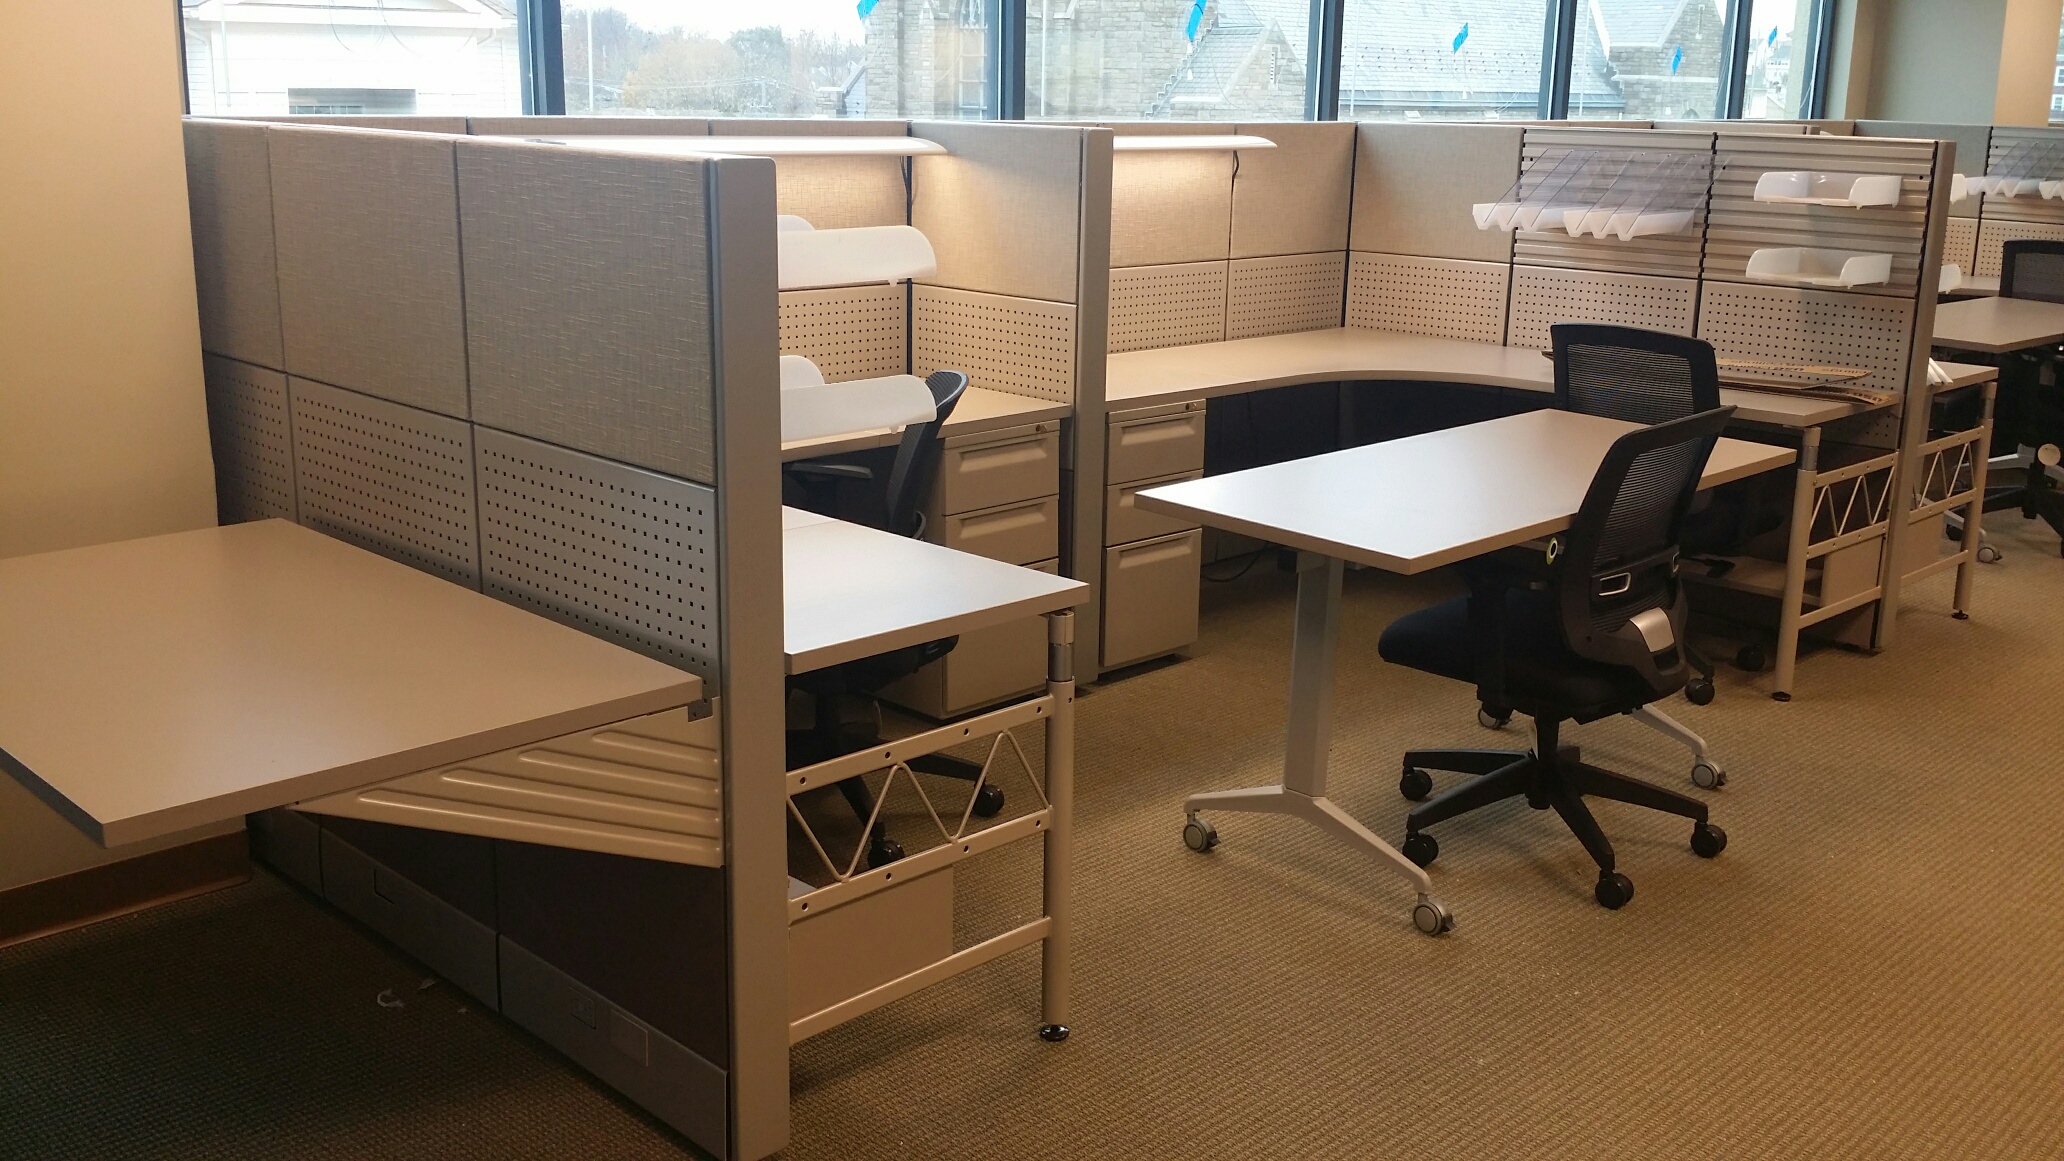 How do you find cheap used office furniture?